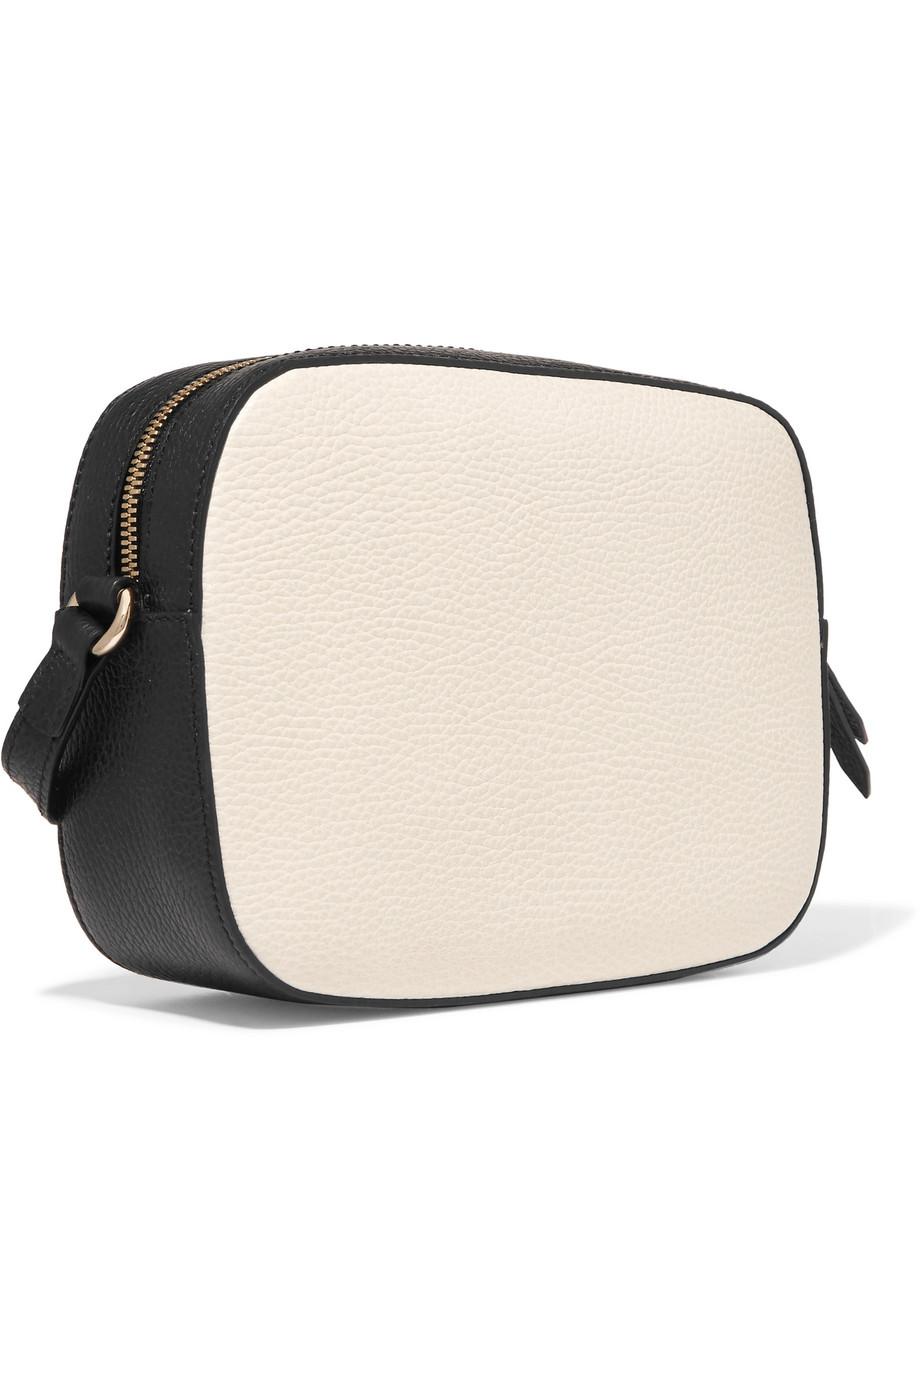 Gucci Soho Disco Textured-leather Shoulder Bag in White - Lyst